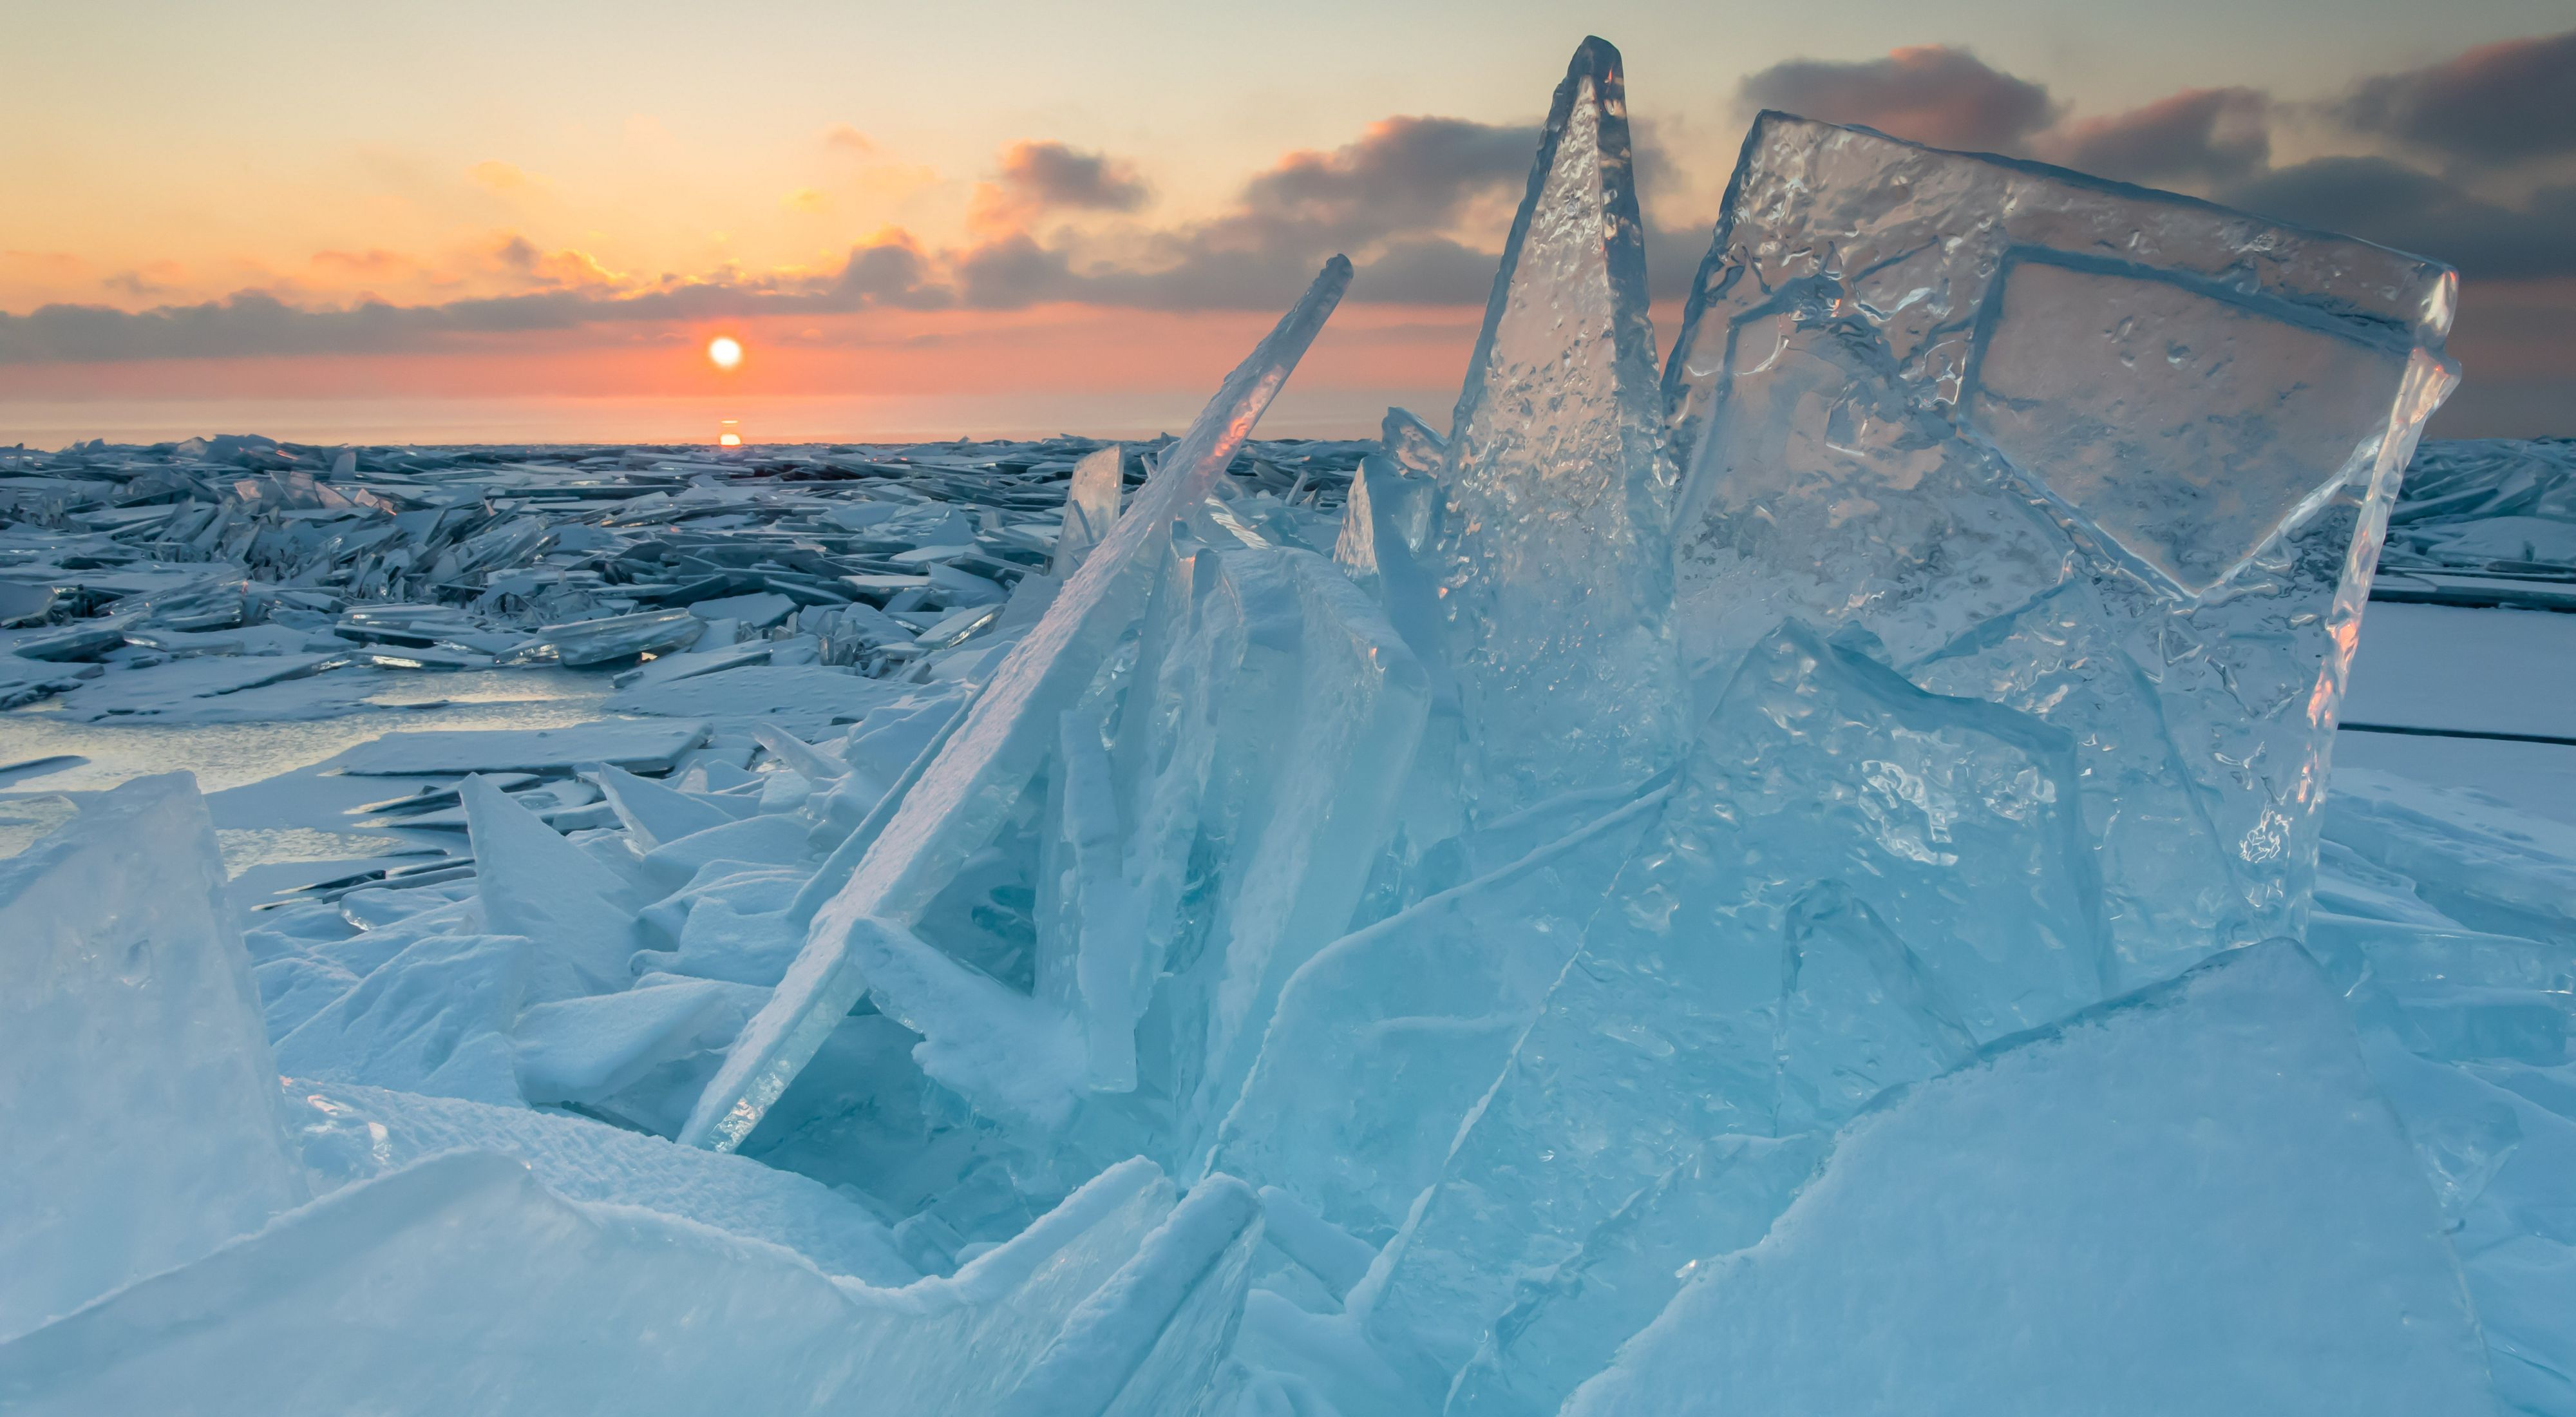 Icy shards on the shore of Lake Superior with a sunset in the background.